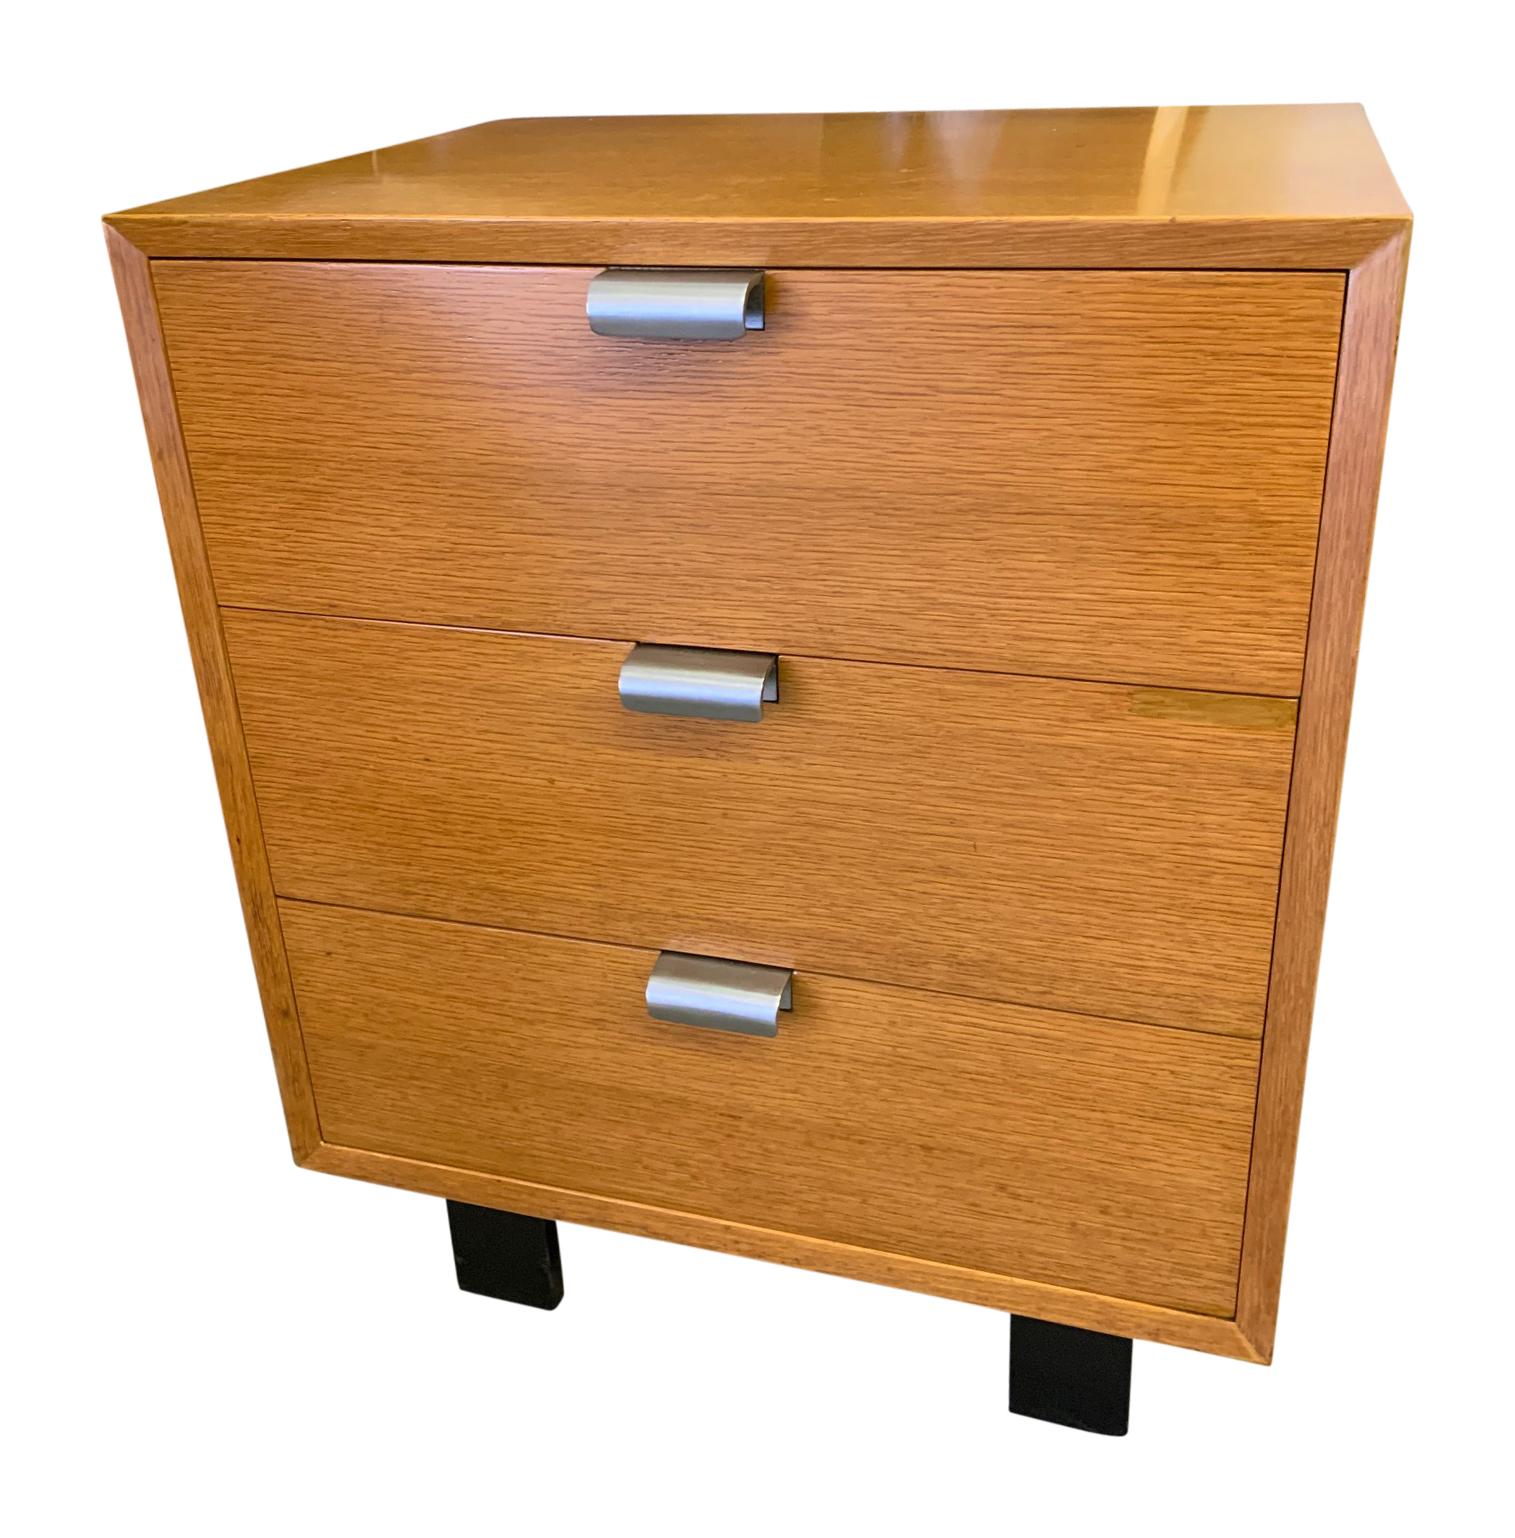 George Nelson for Herman Miller three-drawer wood chest, Mid-Century Modern.